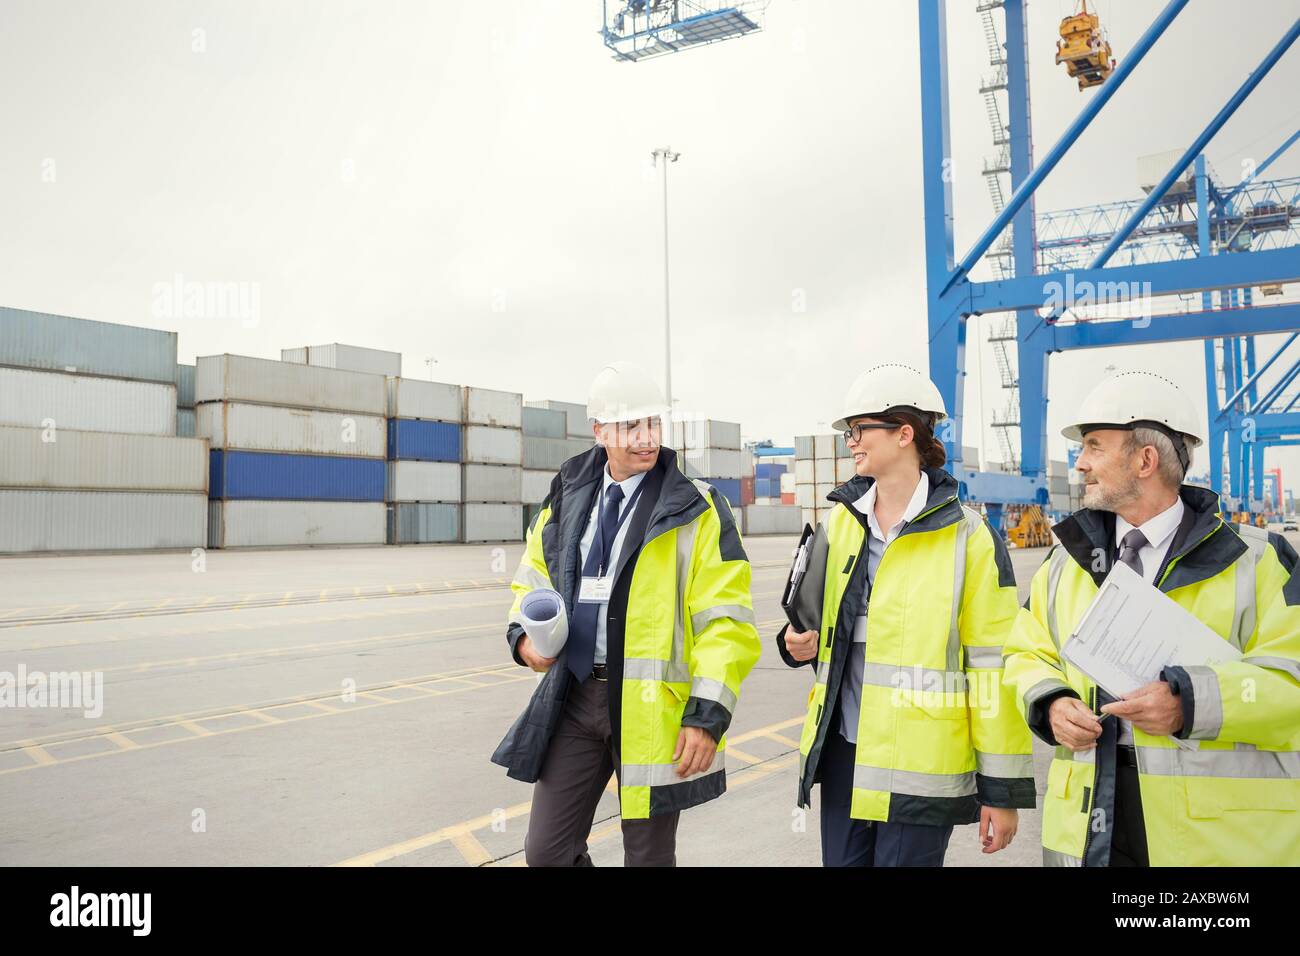 Dock workers and manager walking and talking at shipyard Stock Photo